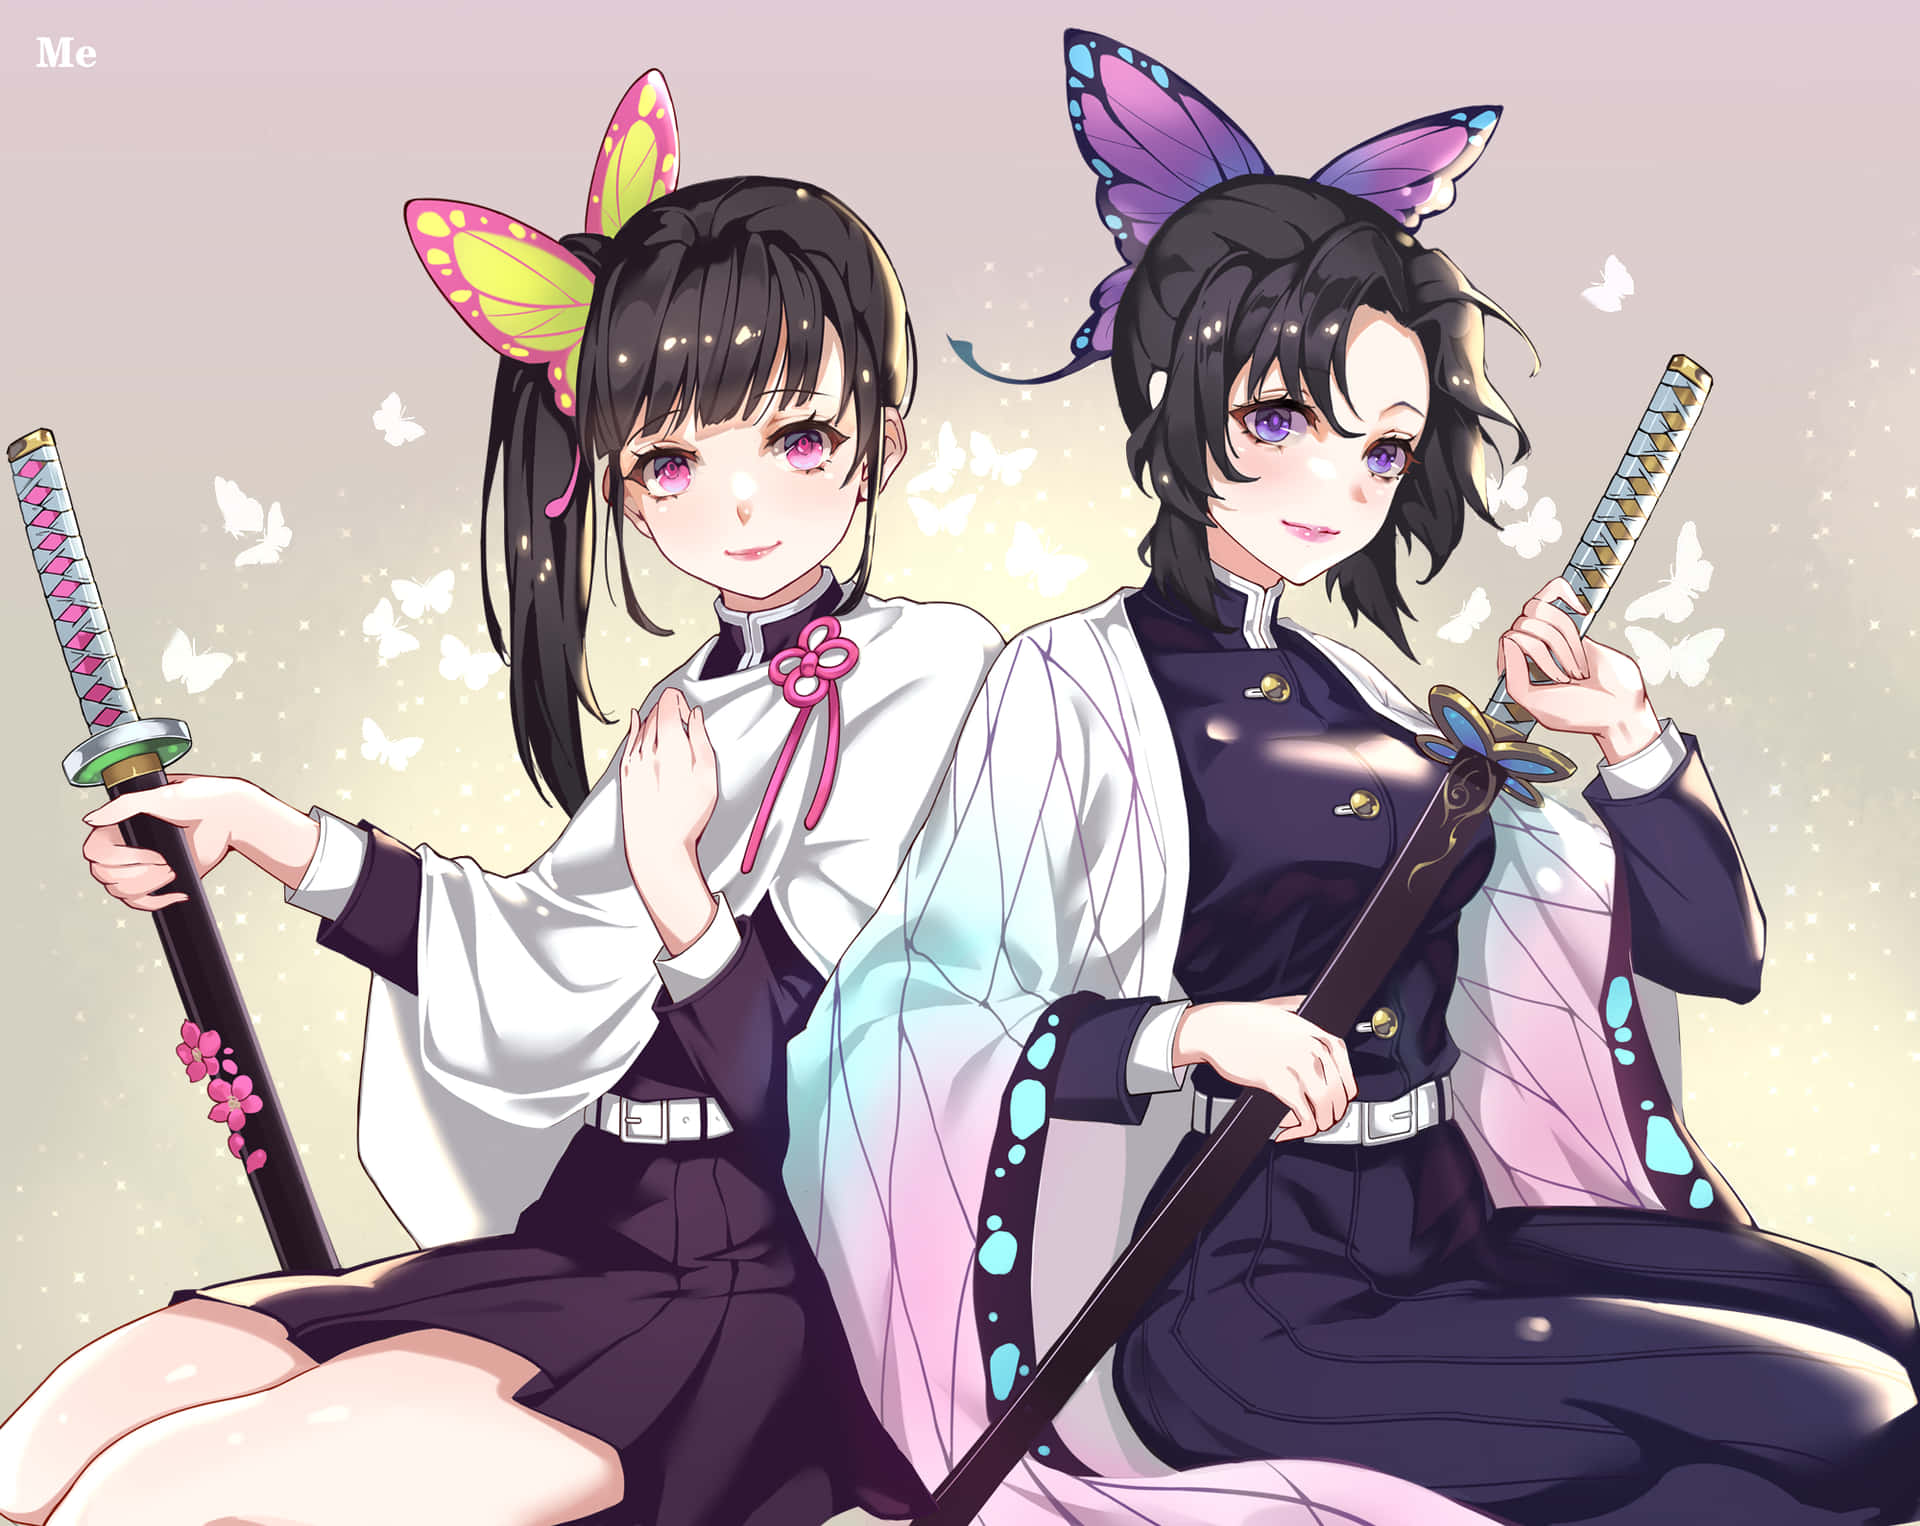 Two Anime Girls With Swords And Butterflies Wallpaper